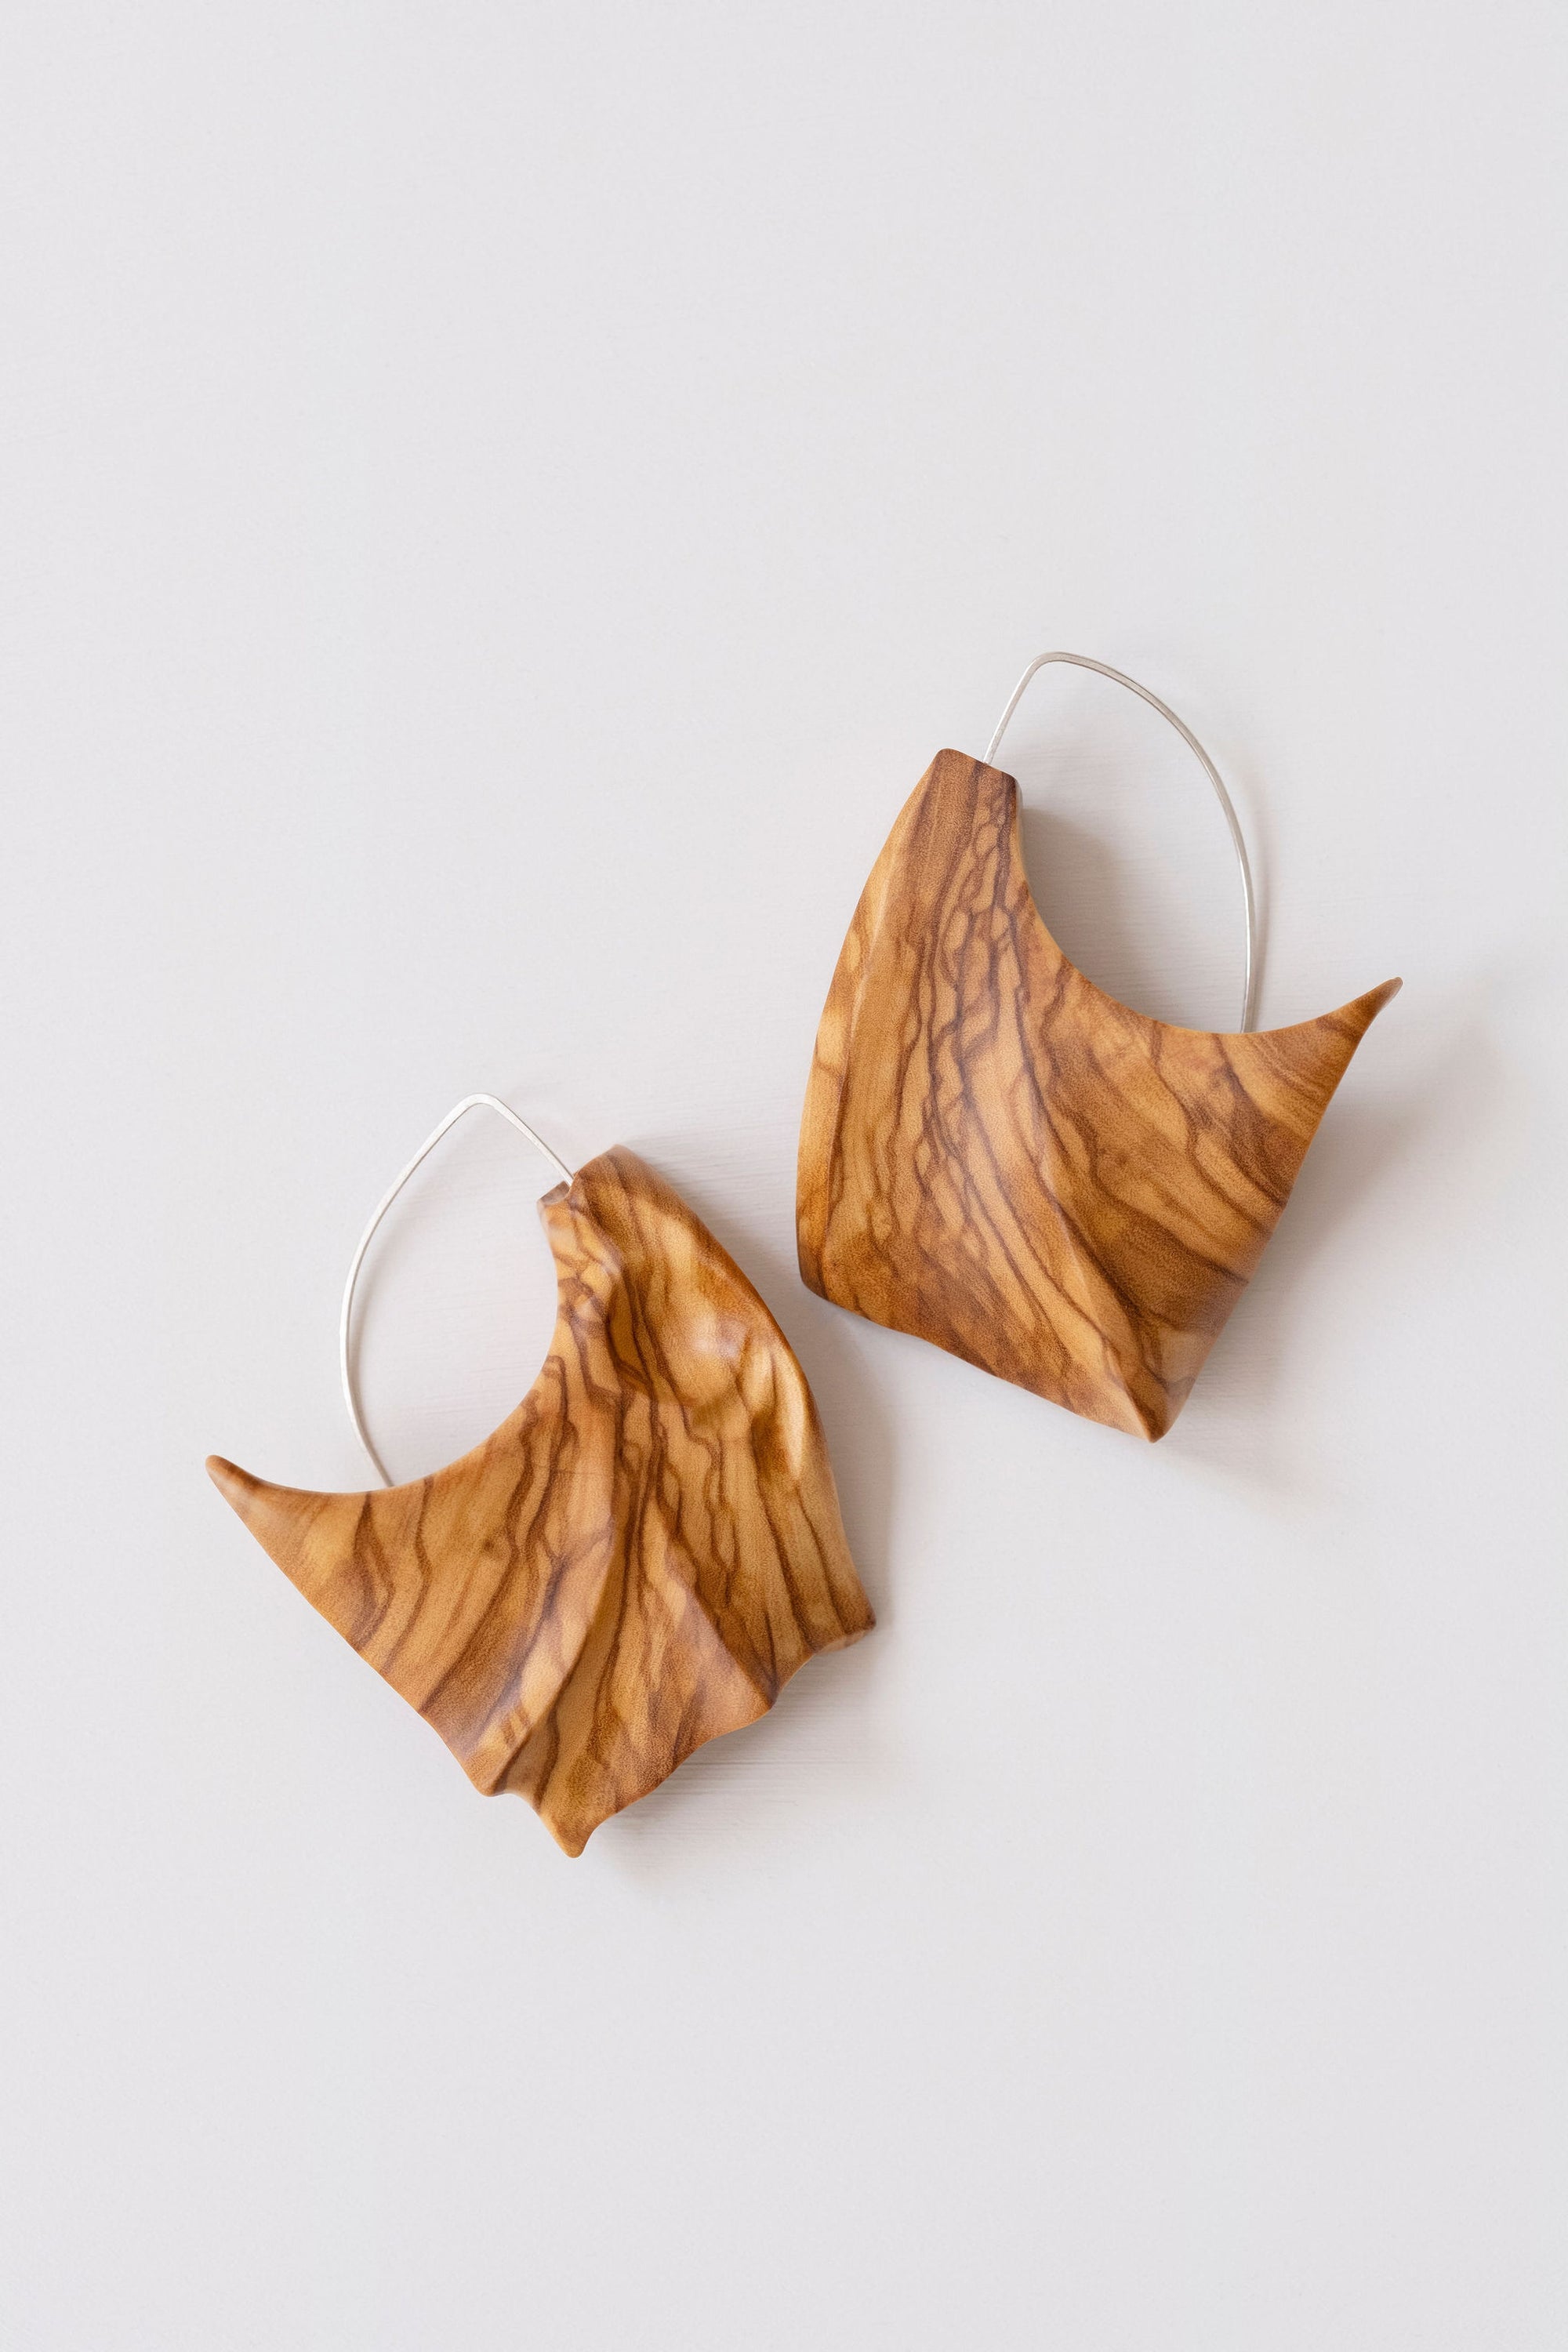 Olive Wood Dramatic "Wing" Earrings